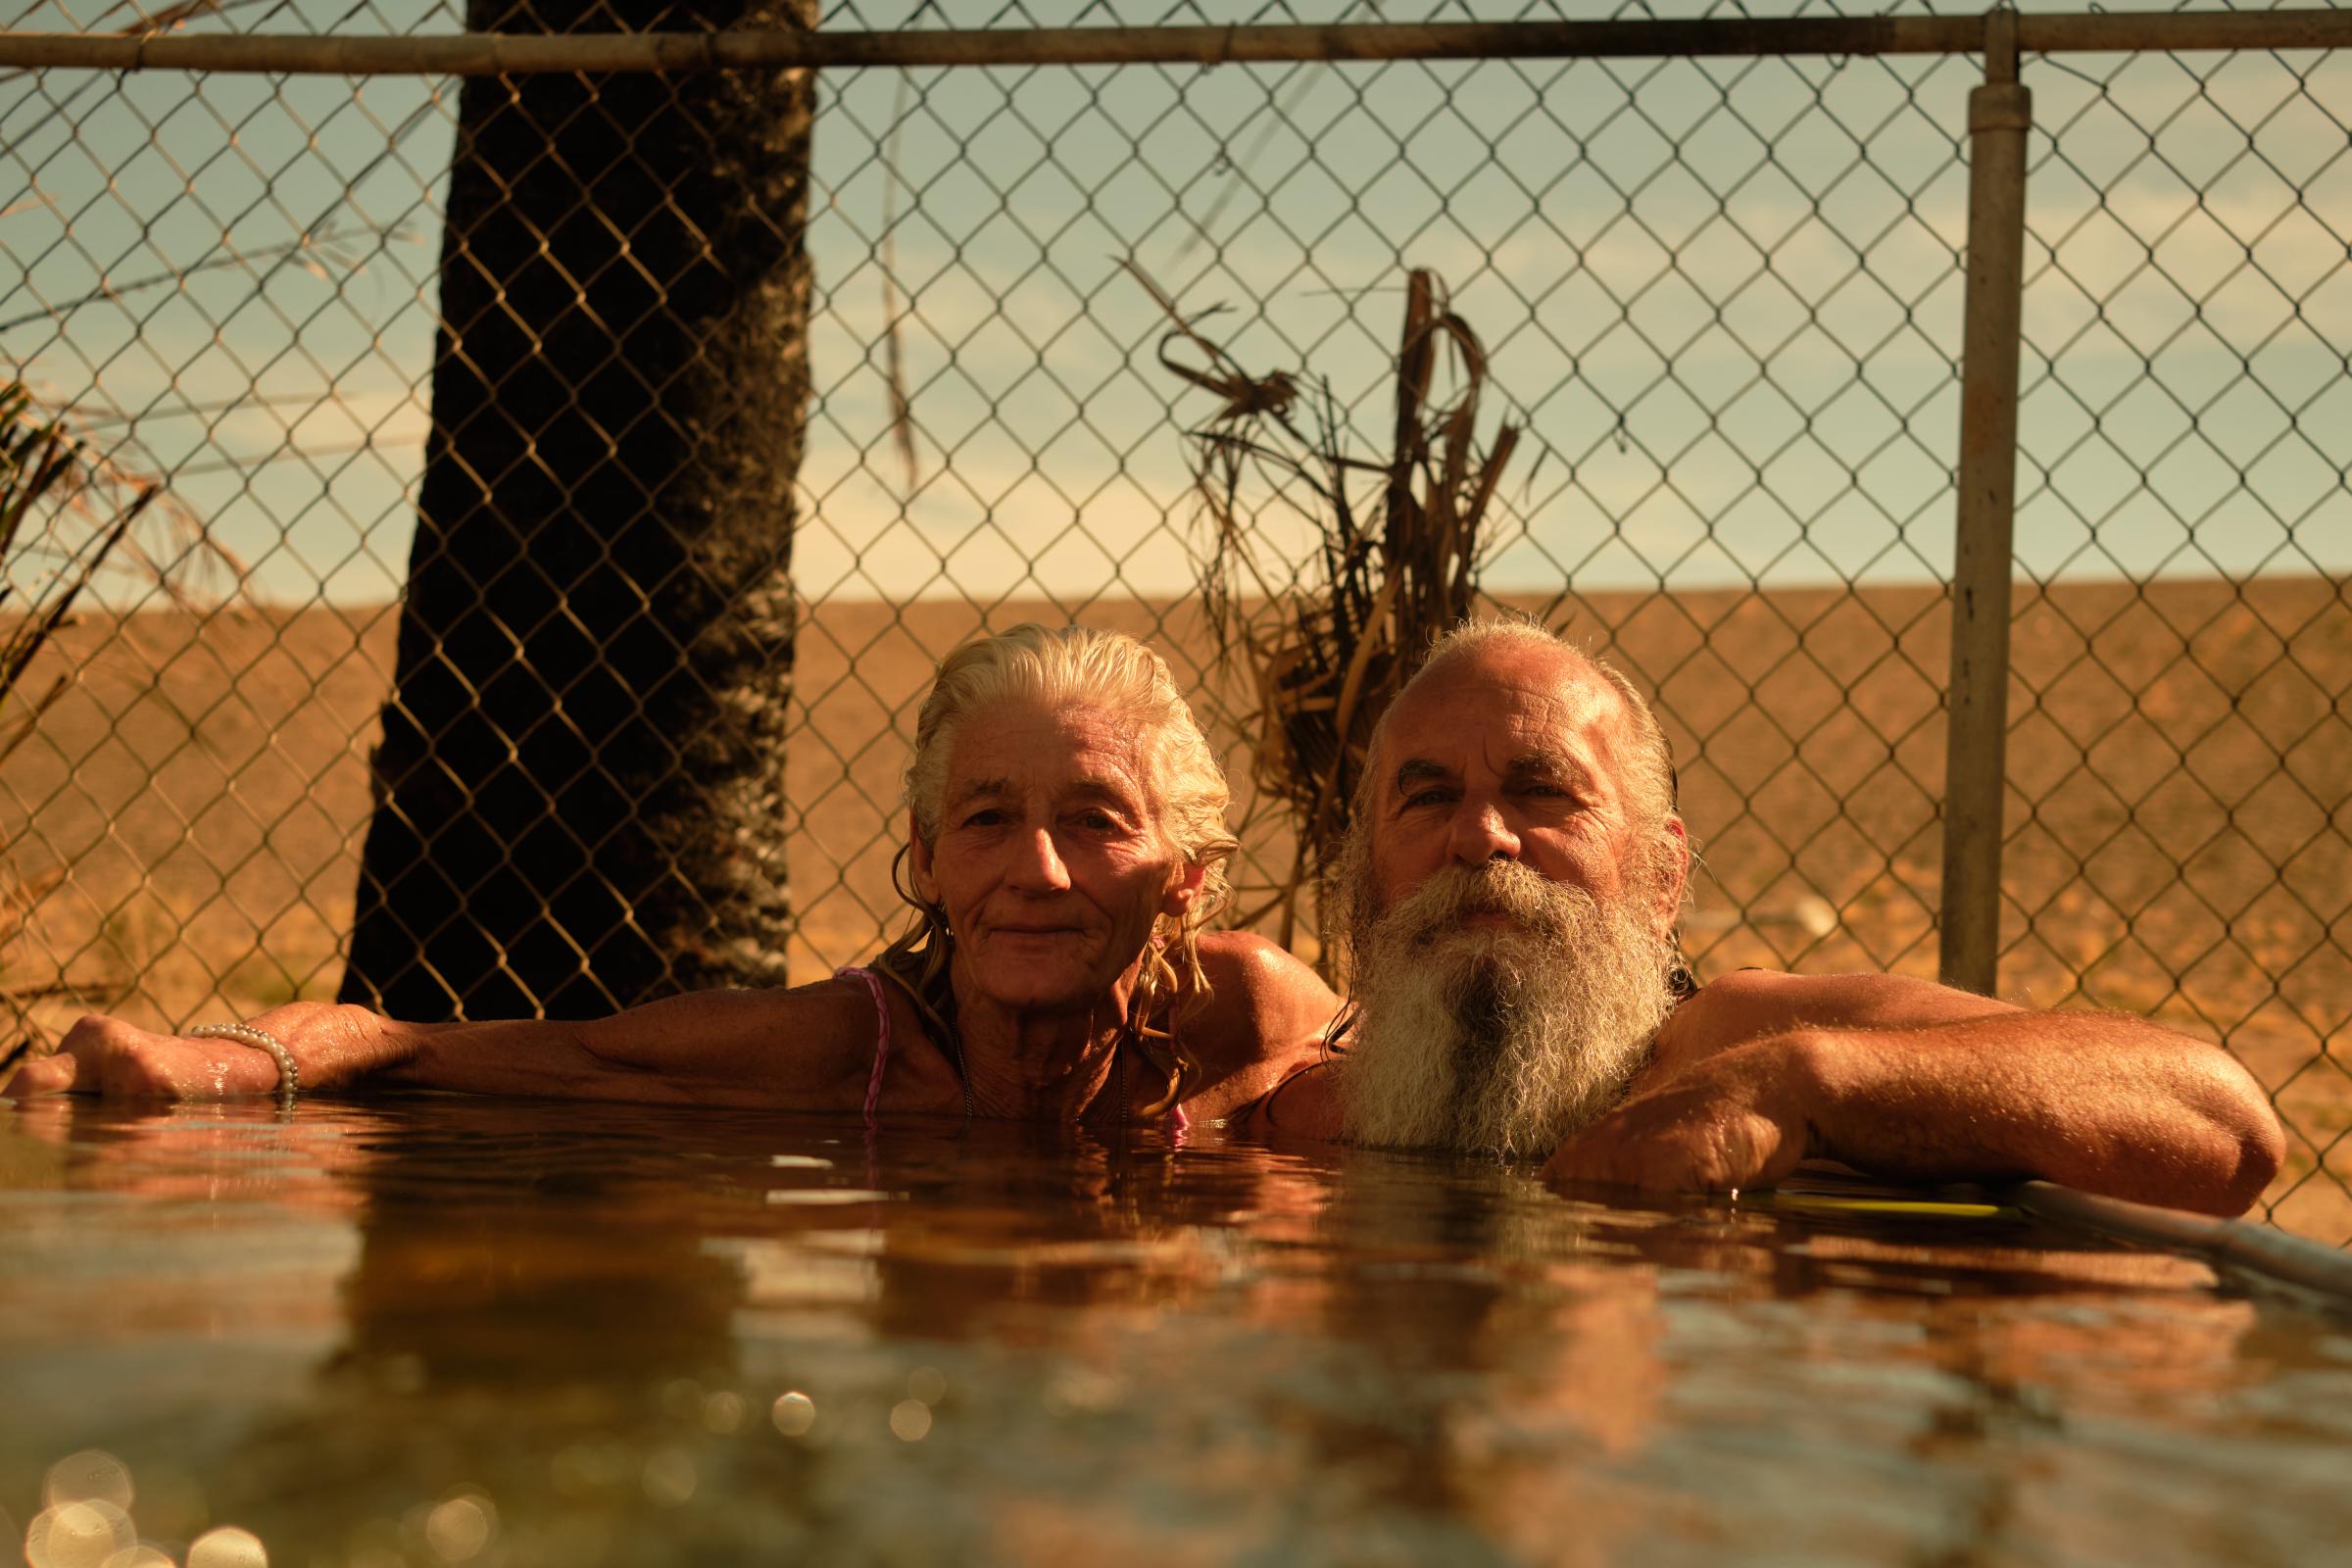 A Warm Winter (An Ongoing Journey) - Darleen and David at the Hot Springs. Holtville, California